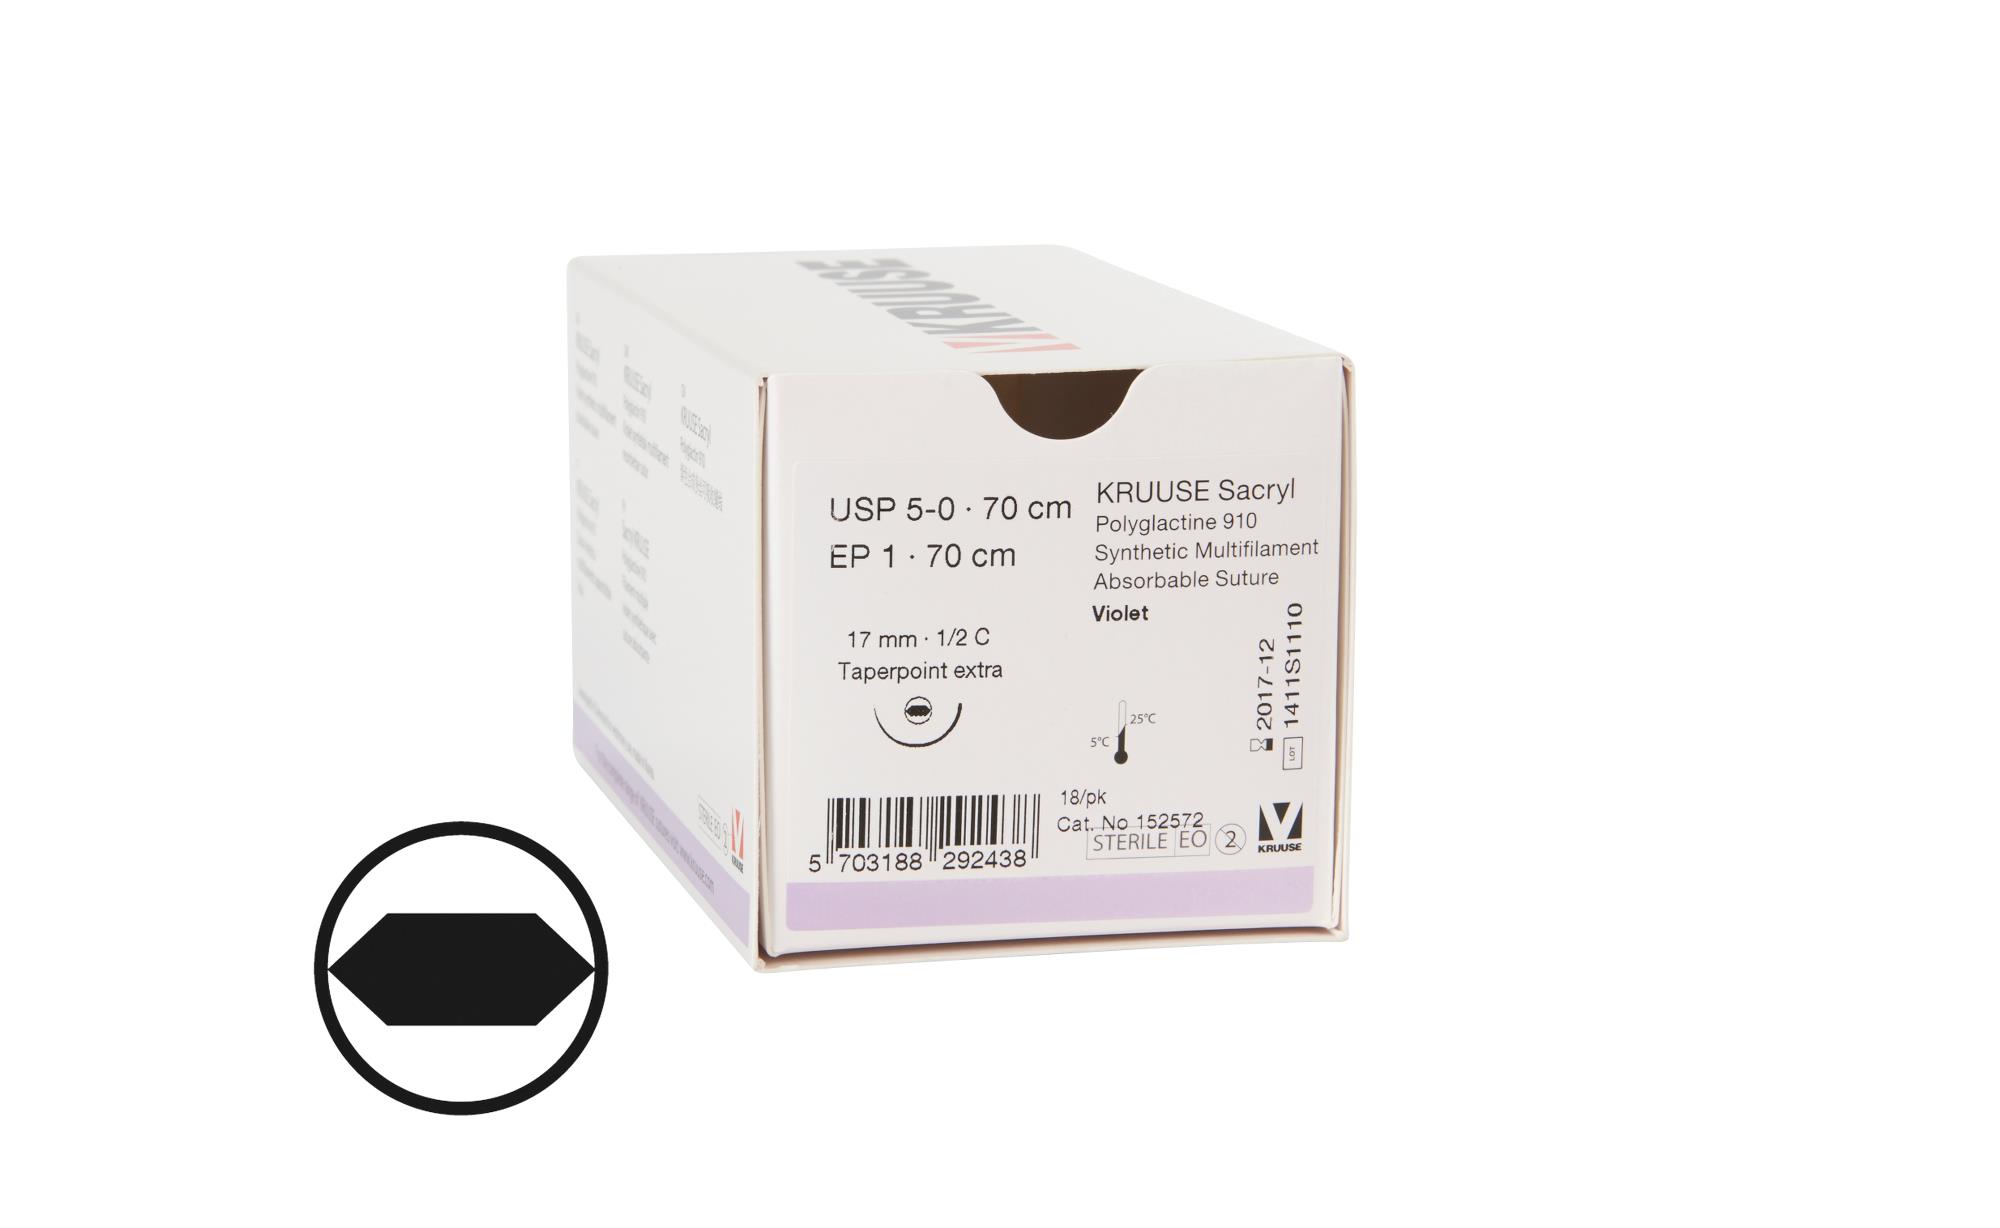 KRUUSE Sacryl suture, USP 5-0, 70 cm violet, 17 mm needle, ½C, round bodied taperpoint extra, 18/pk